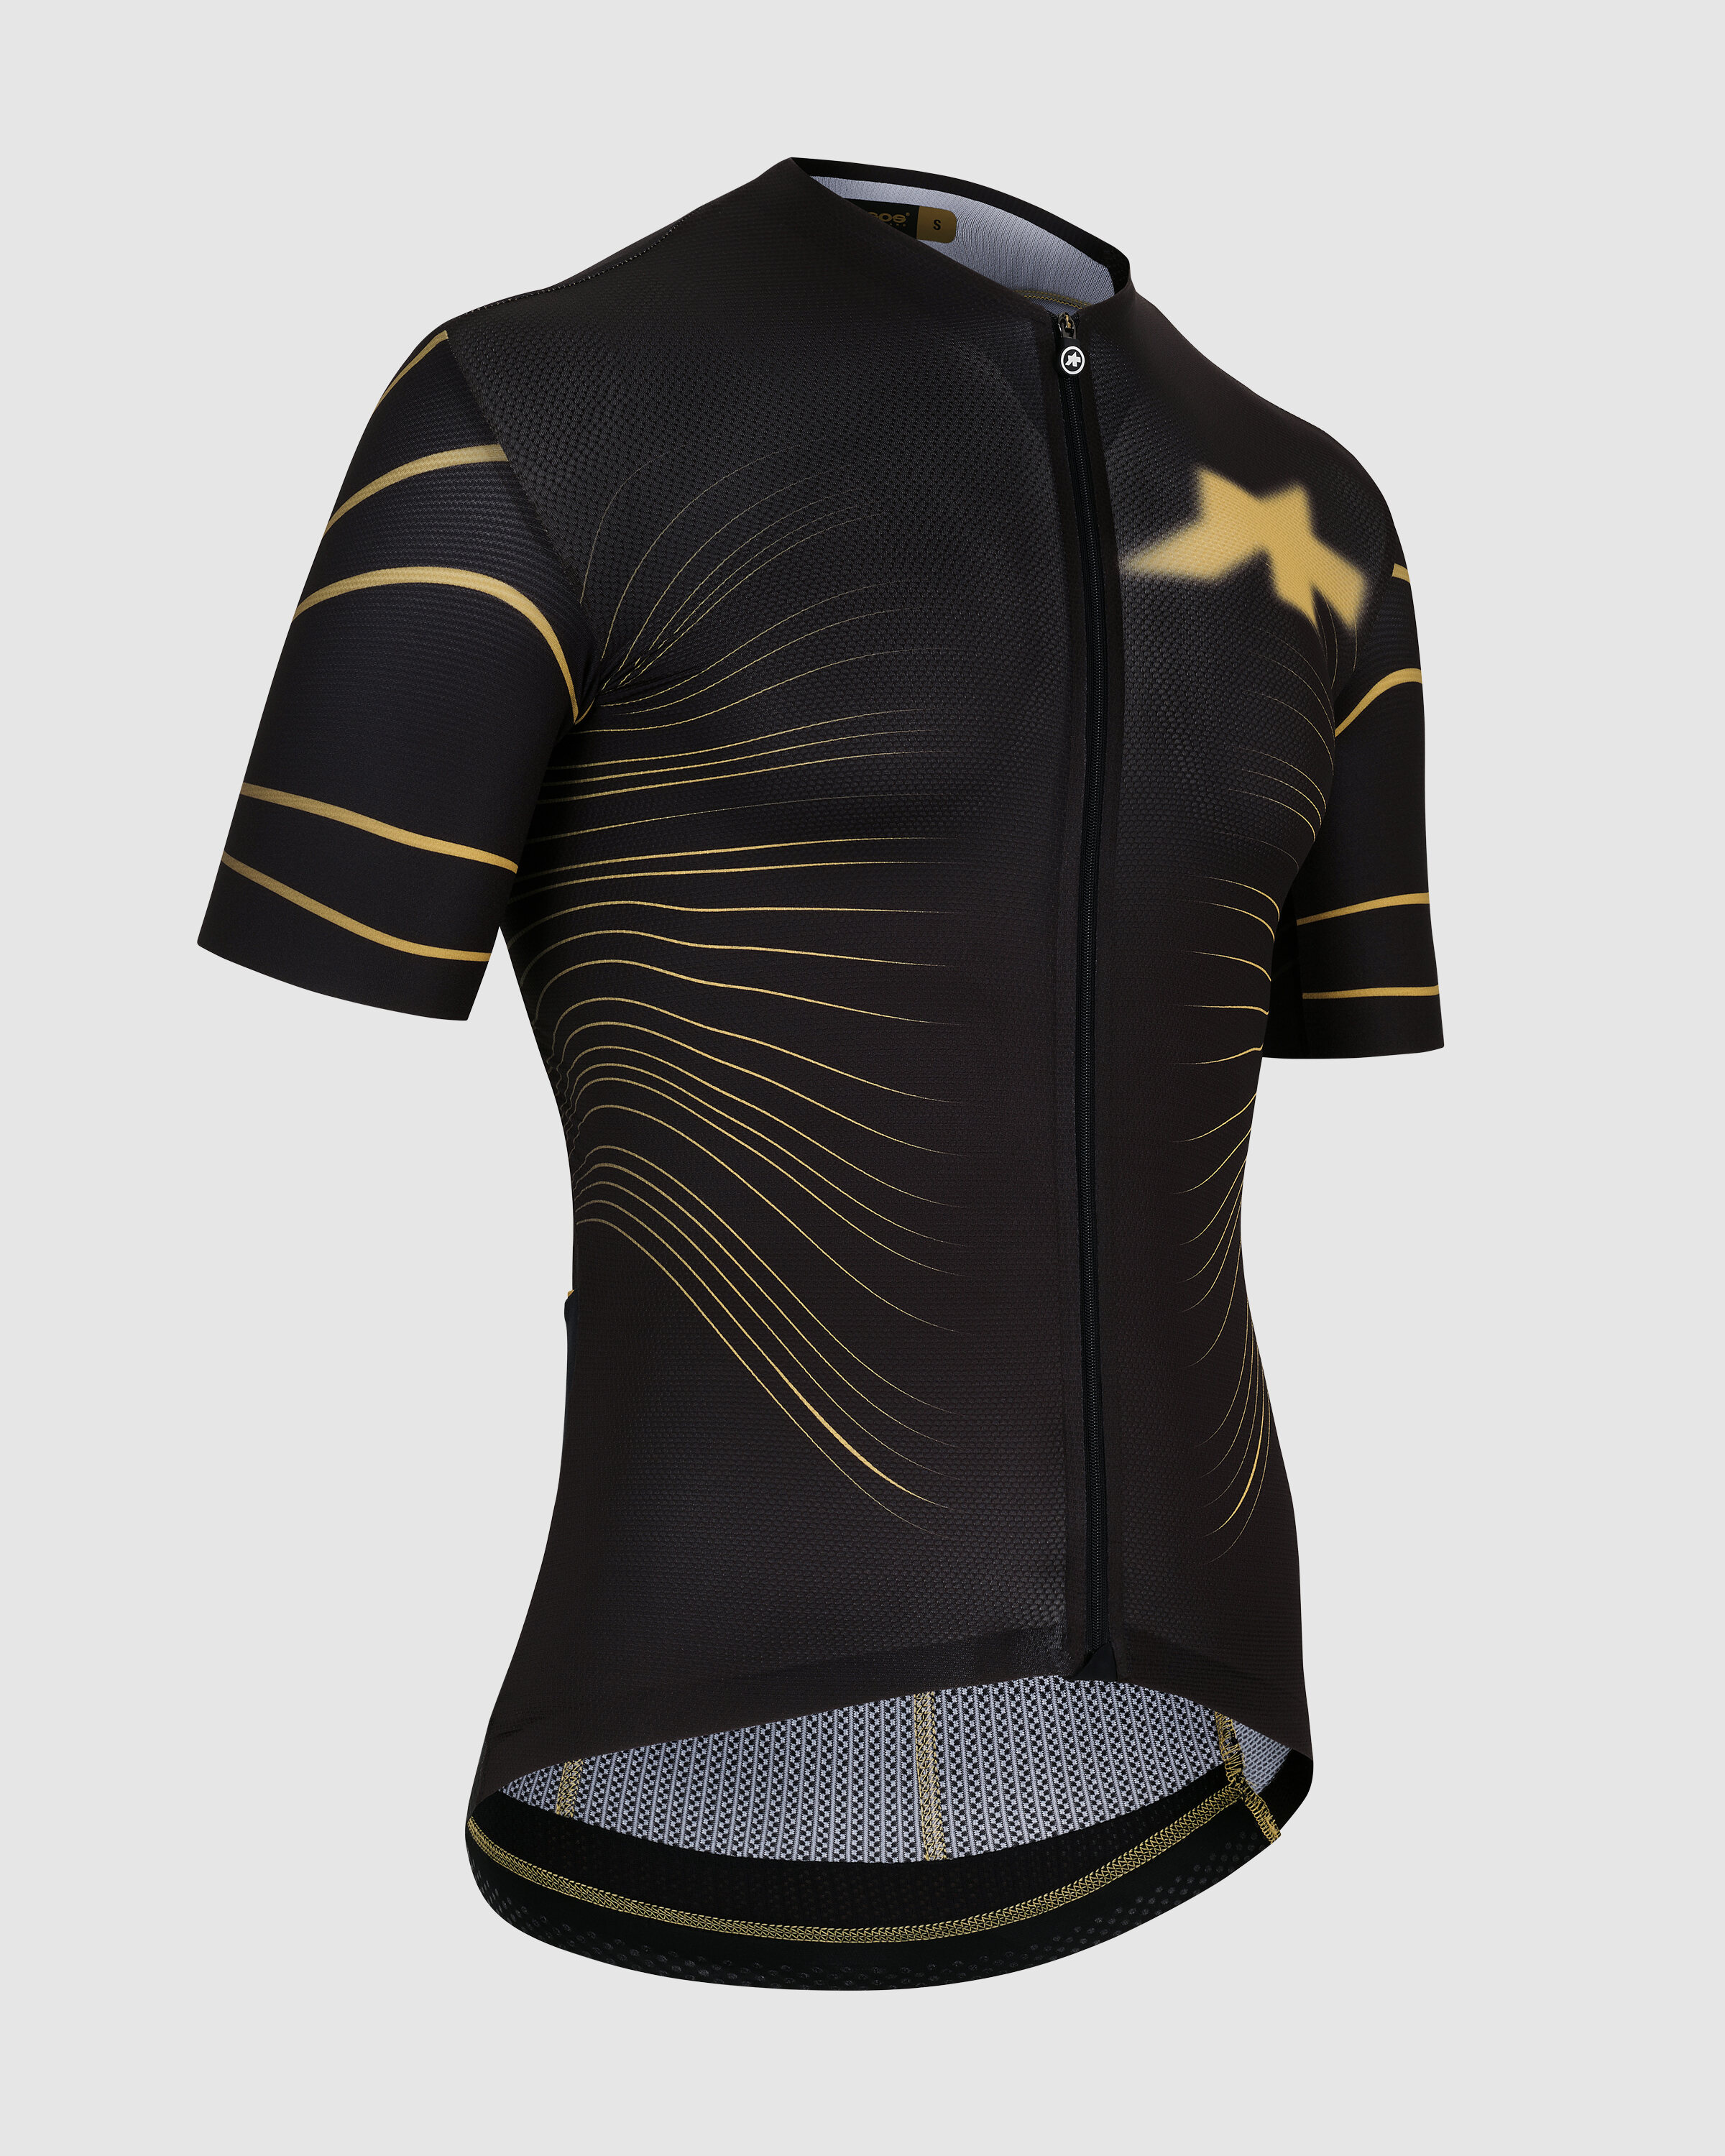 EQUIPE RS JERSEY S9 TARGA – WINGS OF SPEED - ASSOS Of Switzerland - Official Outlet